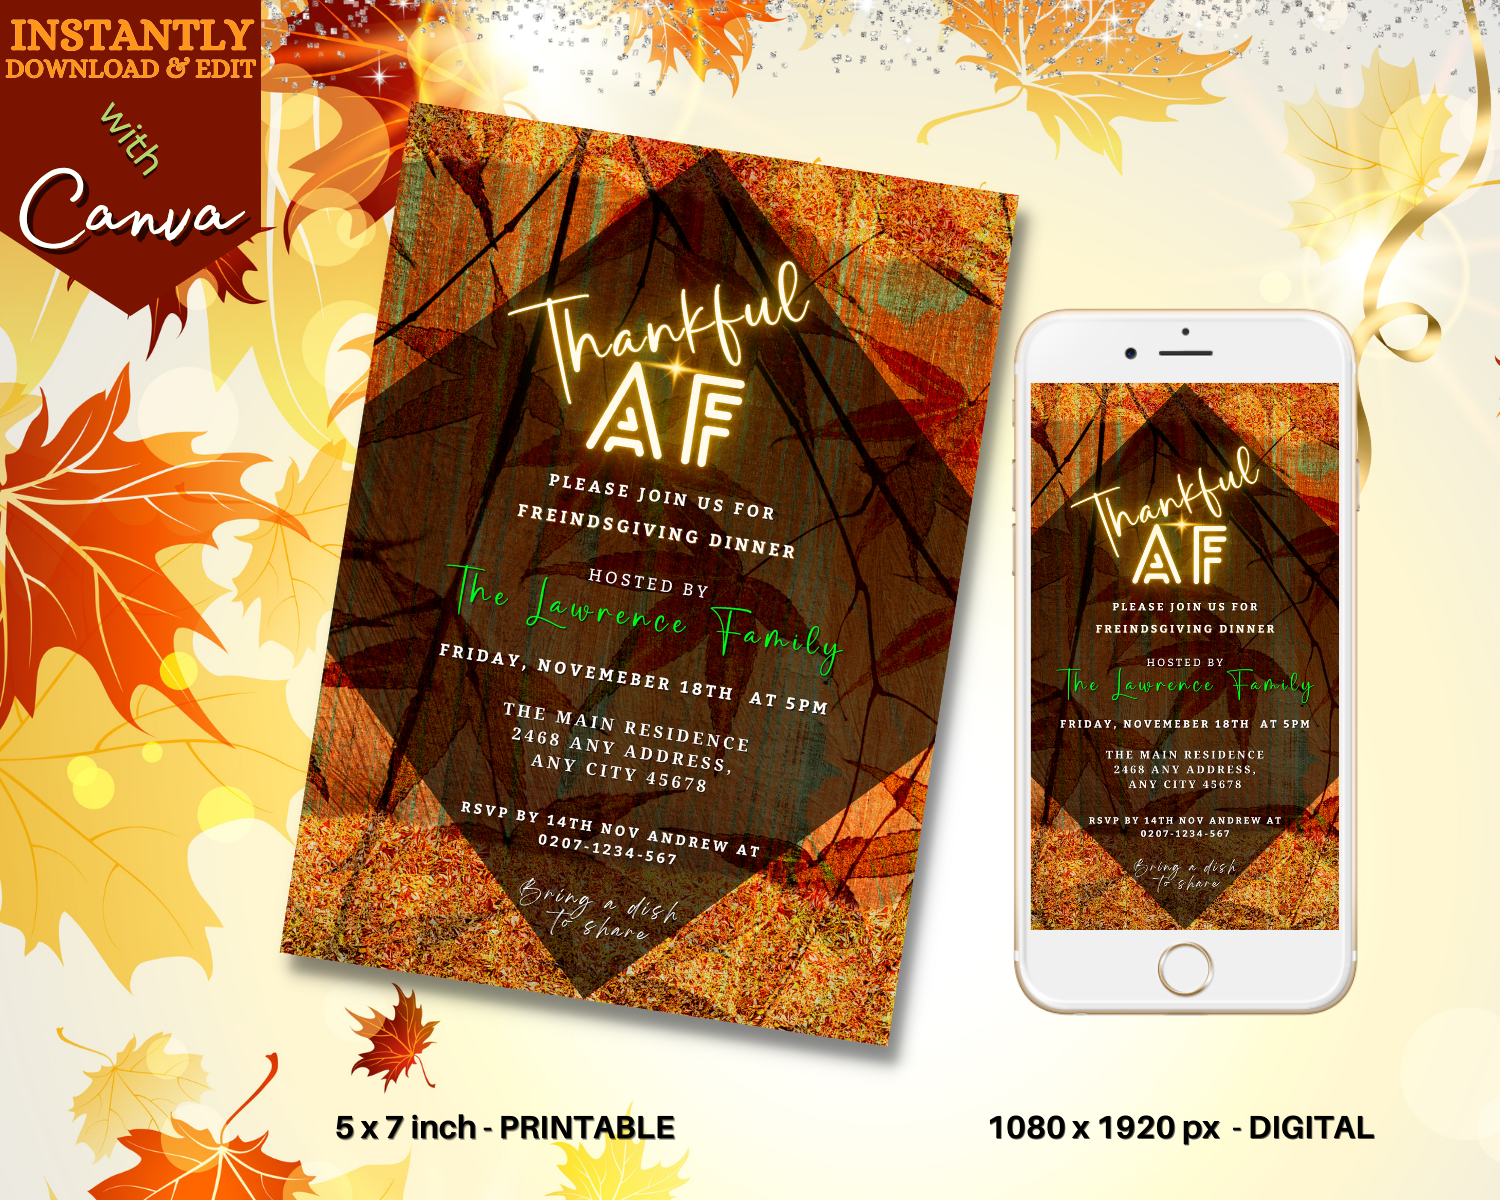 Phone displaying the Thankful AF Orange Gold Pumpkin Thanksgiving Dinner Evite with editable text options.